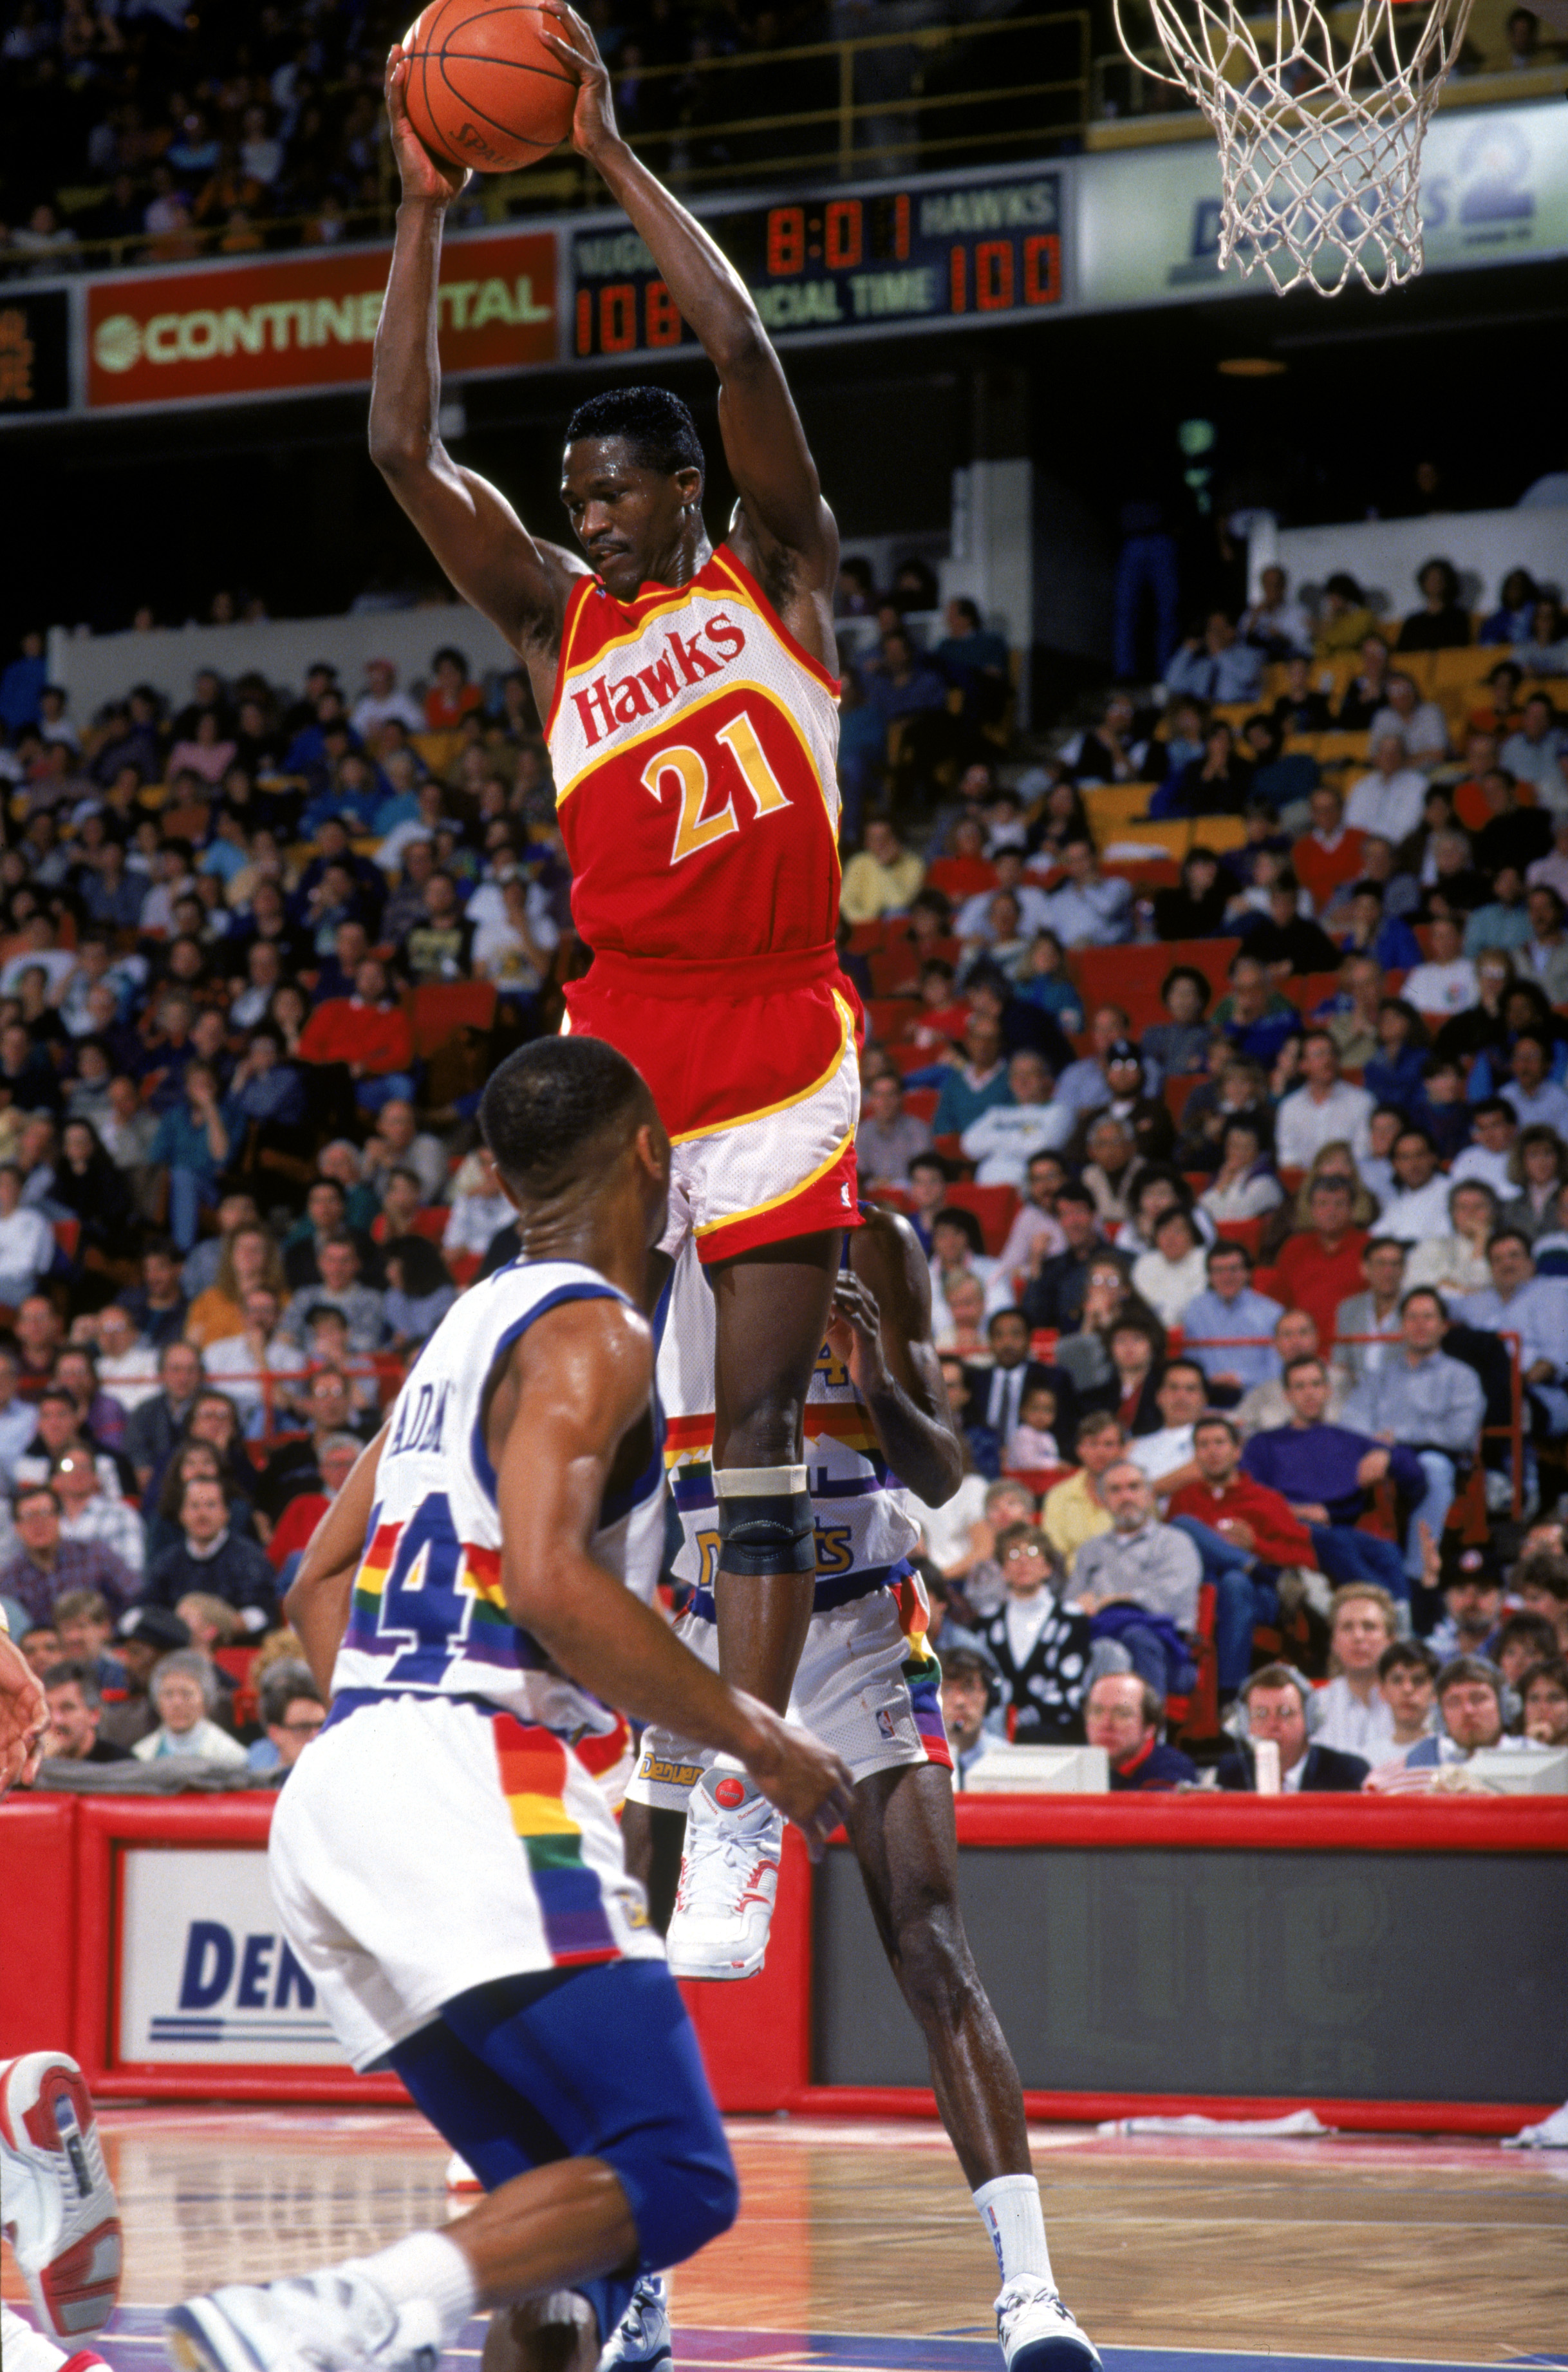 1990:  Dominique Wilkins #21 of the Atlanta Hawks collects a rebound during a 1990-1991 NBA season game against the Denver Nuggets.  (Photo by Tim DeFrisco/Getty Images)